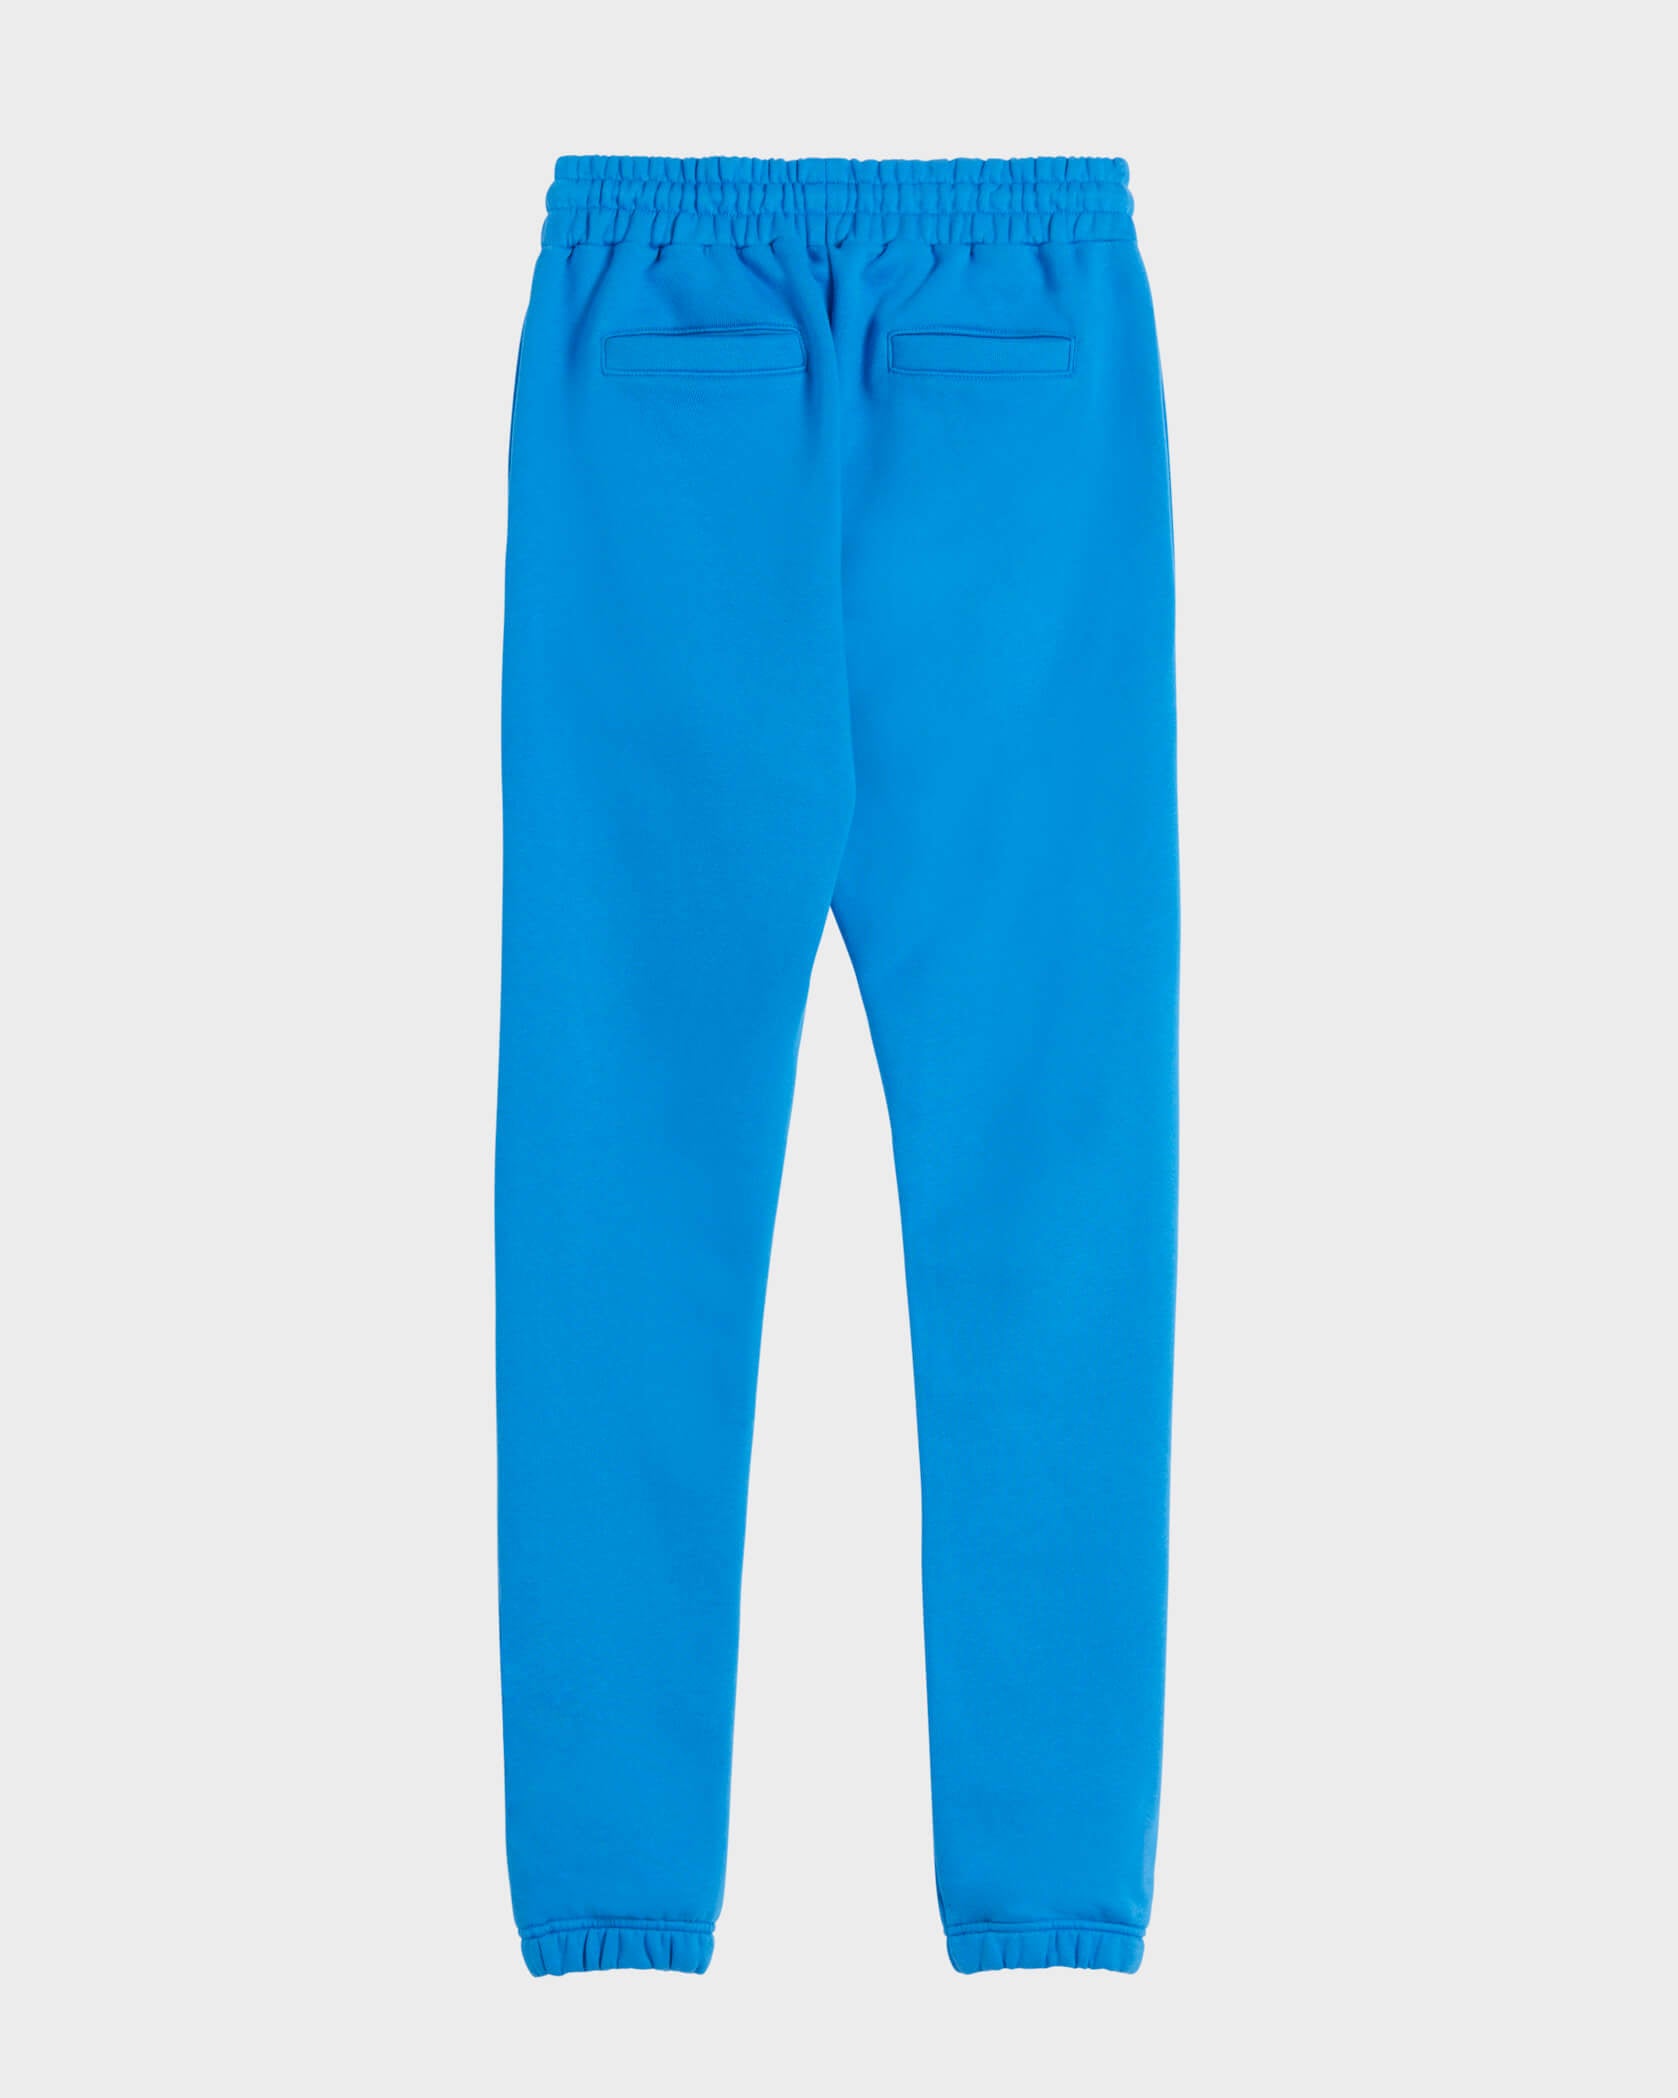 Twinzz blue joggers